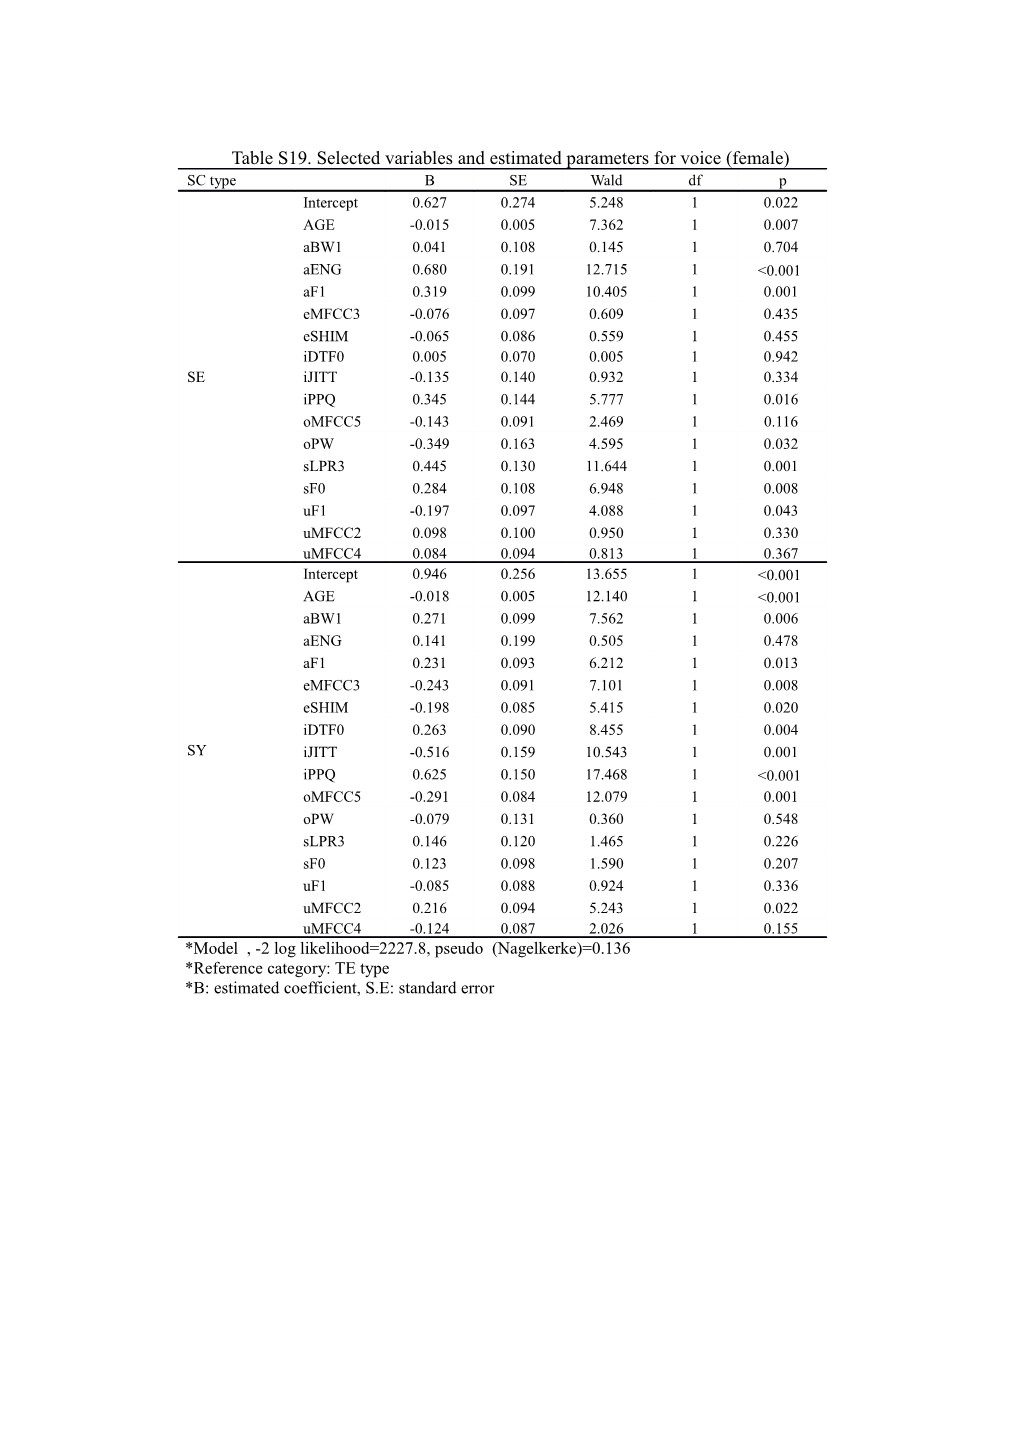 Table S19. Selected Variables and Estimated Parameters for Voice (Female)